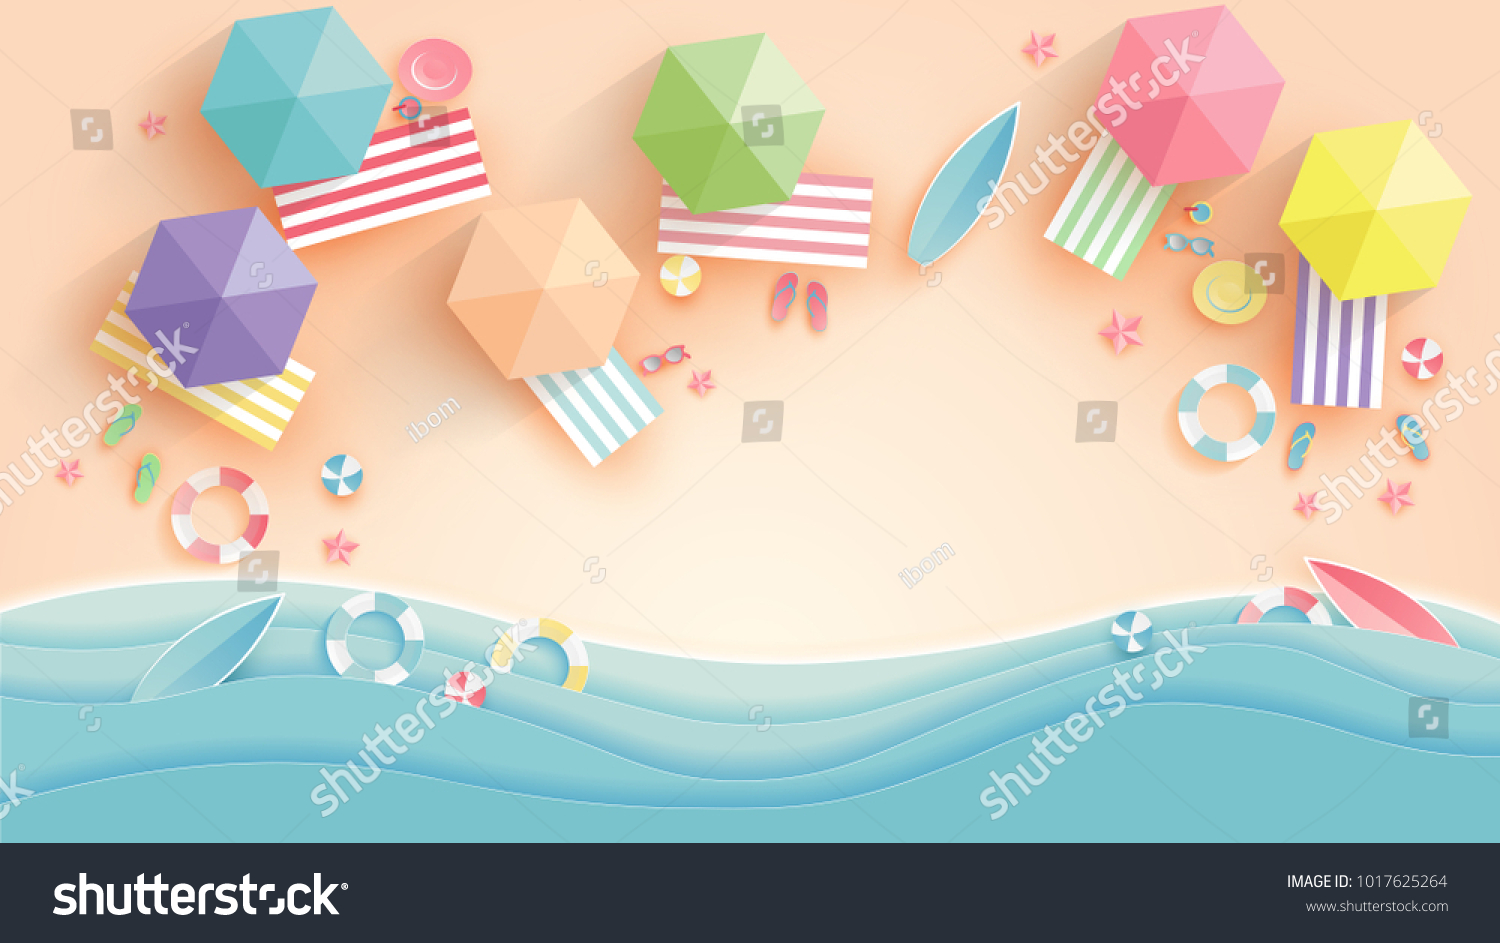 Top view beach background with umbrellas,balls,swim ring,sunglasses,surfboard,
hat,sandals,juice,starfish and sea. aerial view of summer beach in paper craft style.paper cut and craft style. vector. #1017625264